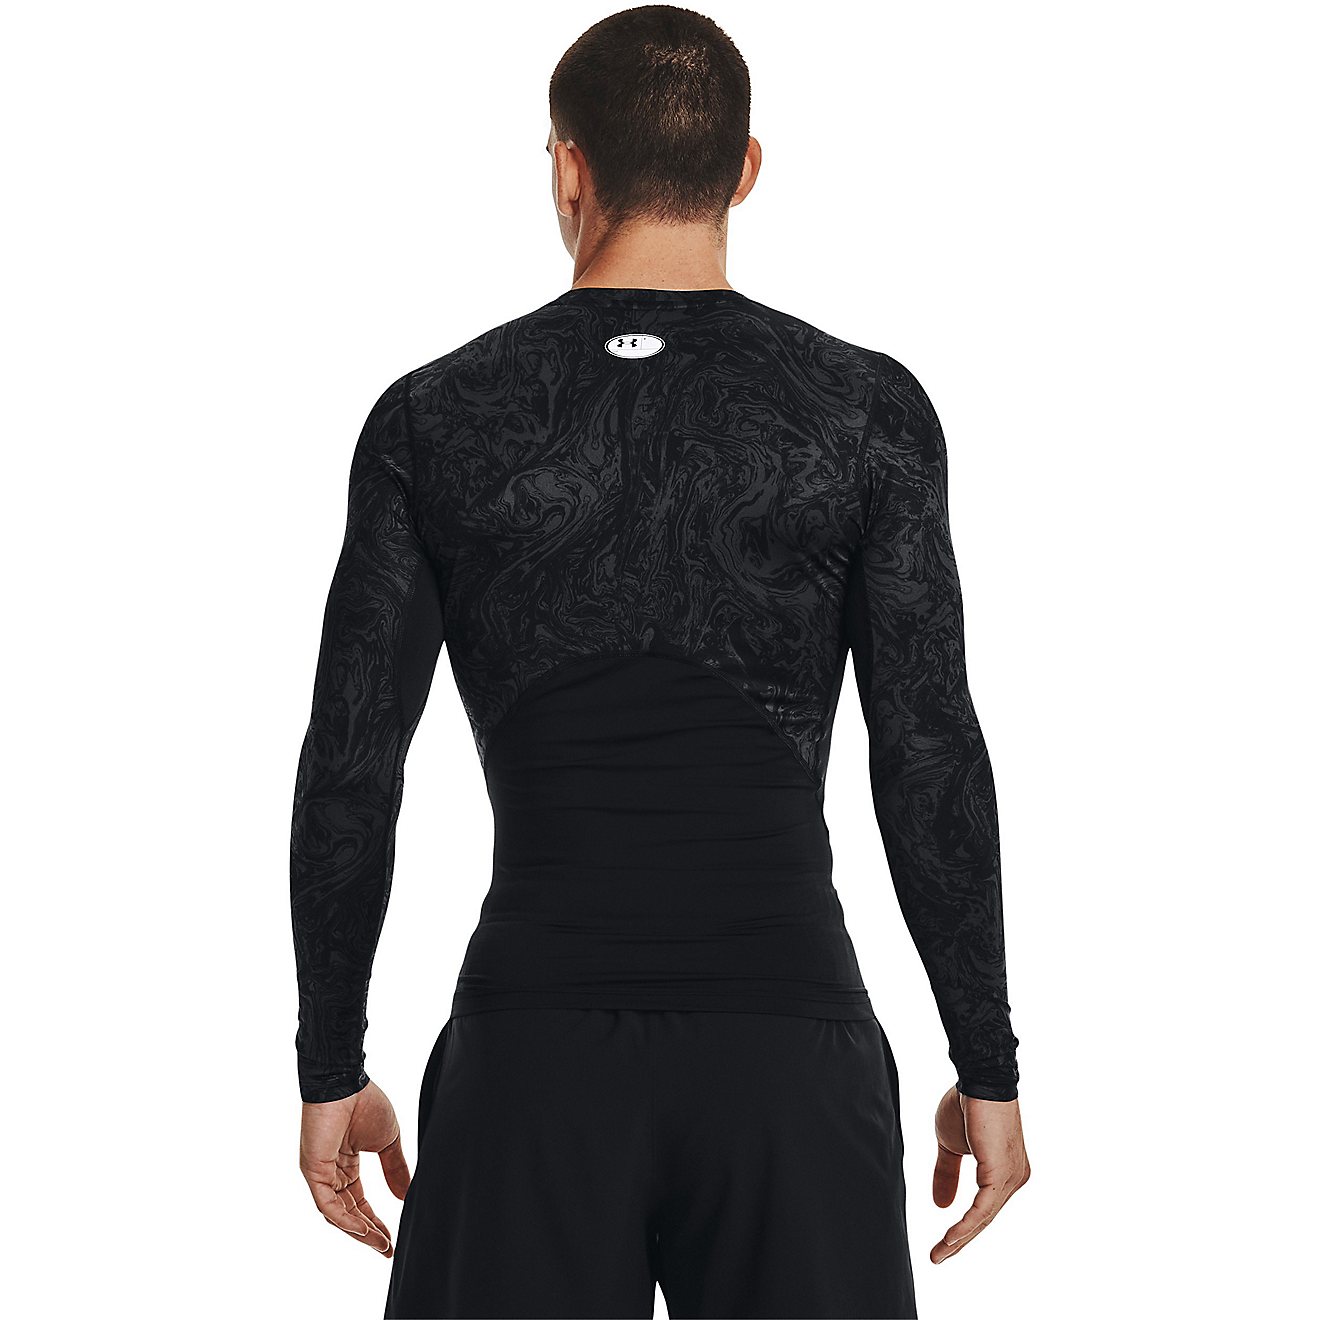 Under Armour Men's HeatGear Armour Compression Print Long Sleeve T-shirt                                                         - view number 2